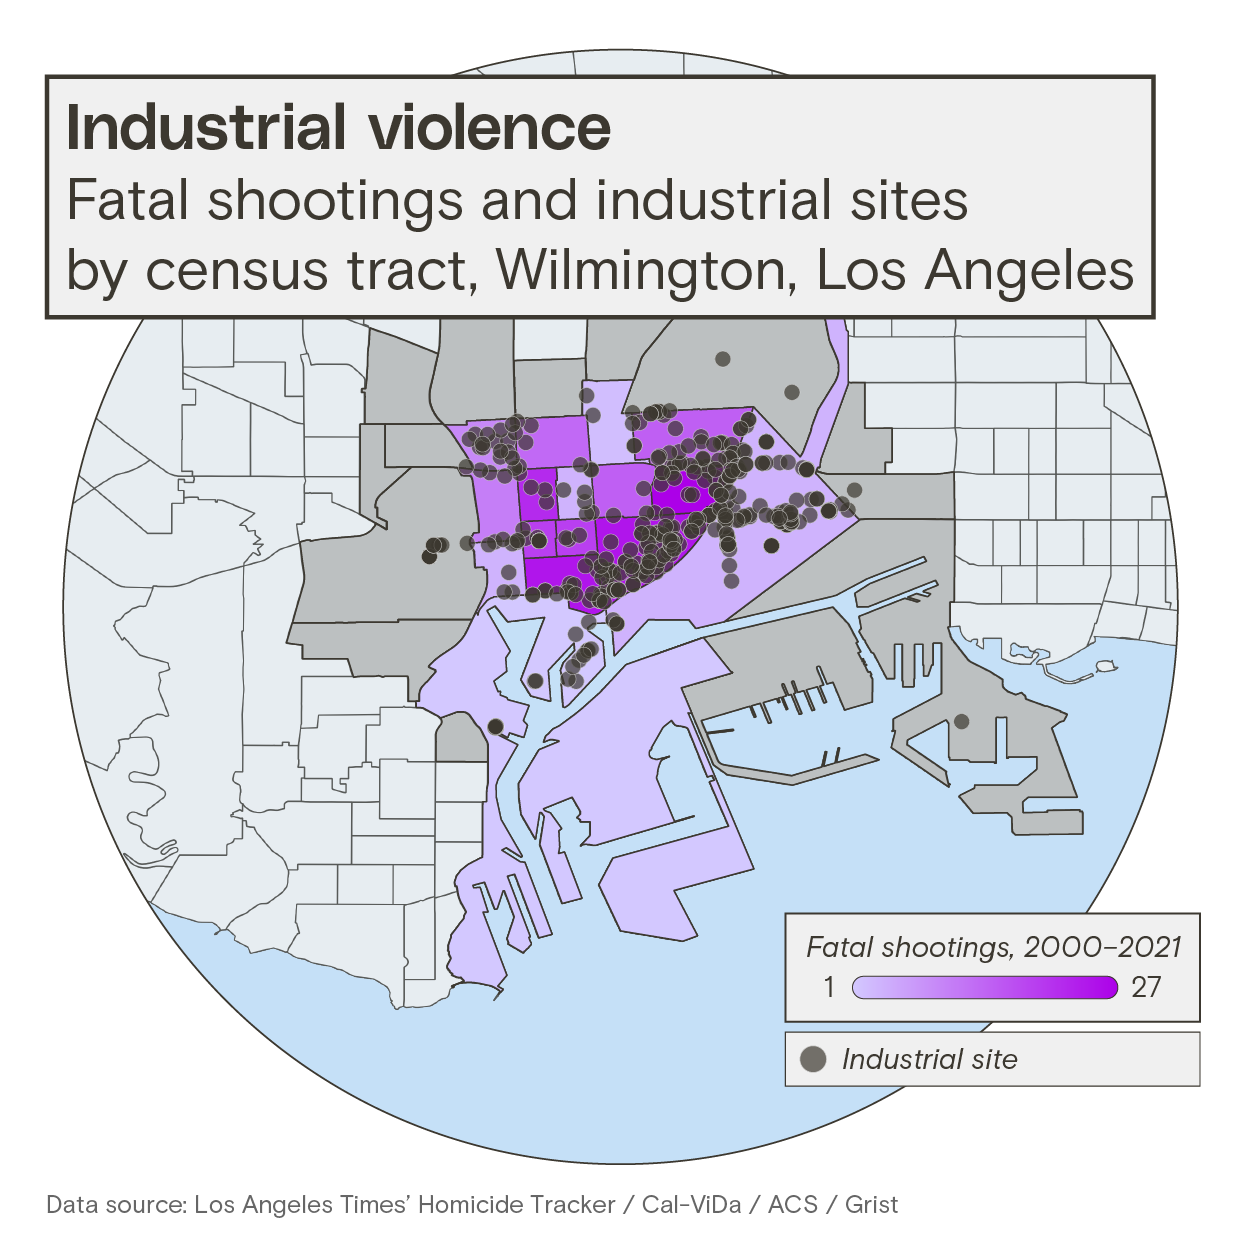 A map showing fatal shootings and industrial sites by census tract in Wilmington, Los Angeles, between 2000 and 2021. More shootings have occurred in tracts with more industrial sites.